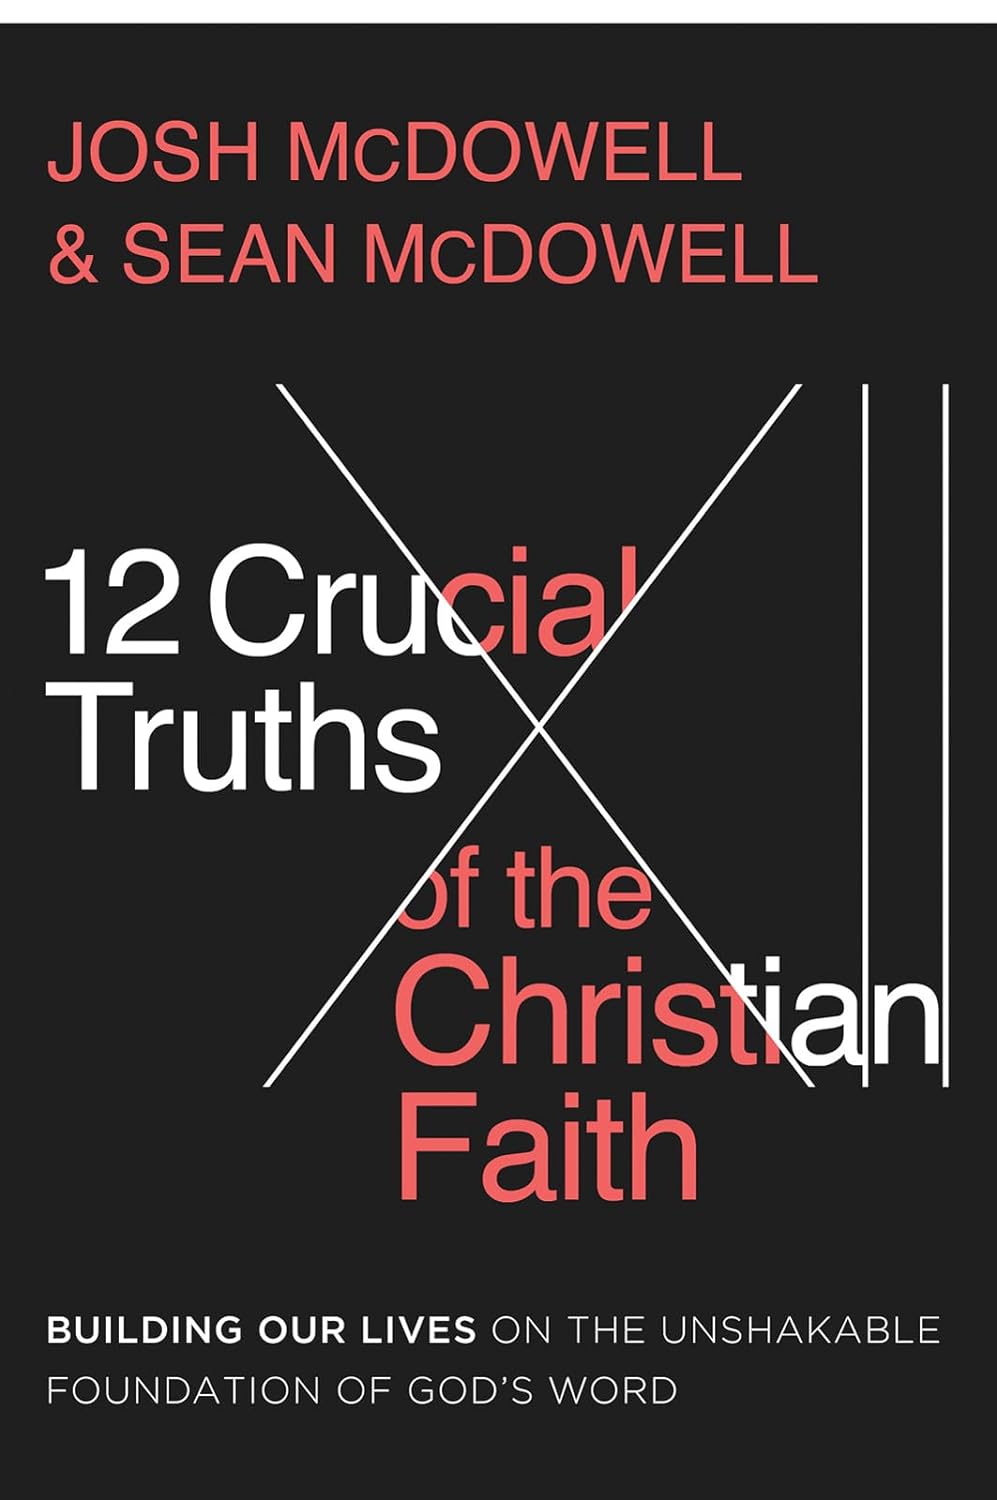 12 Crucial Truths of the Christian Faith: Building Our Lives on the Unshakable Foundation of God’s Word